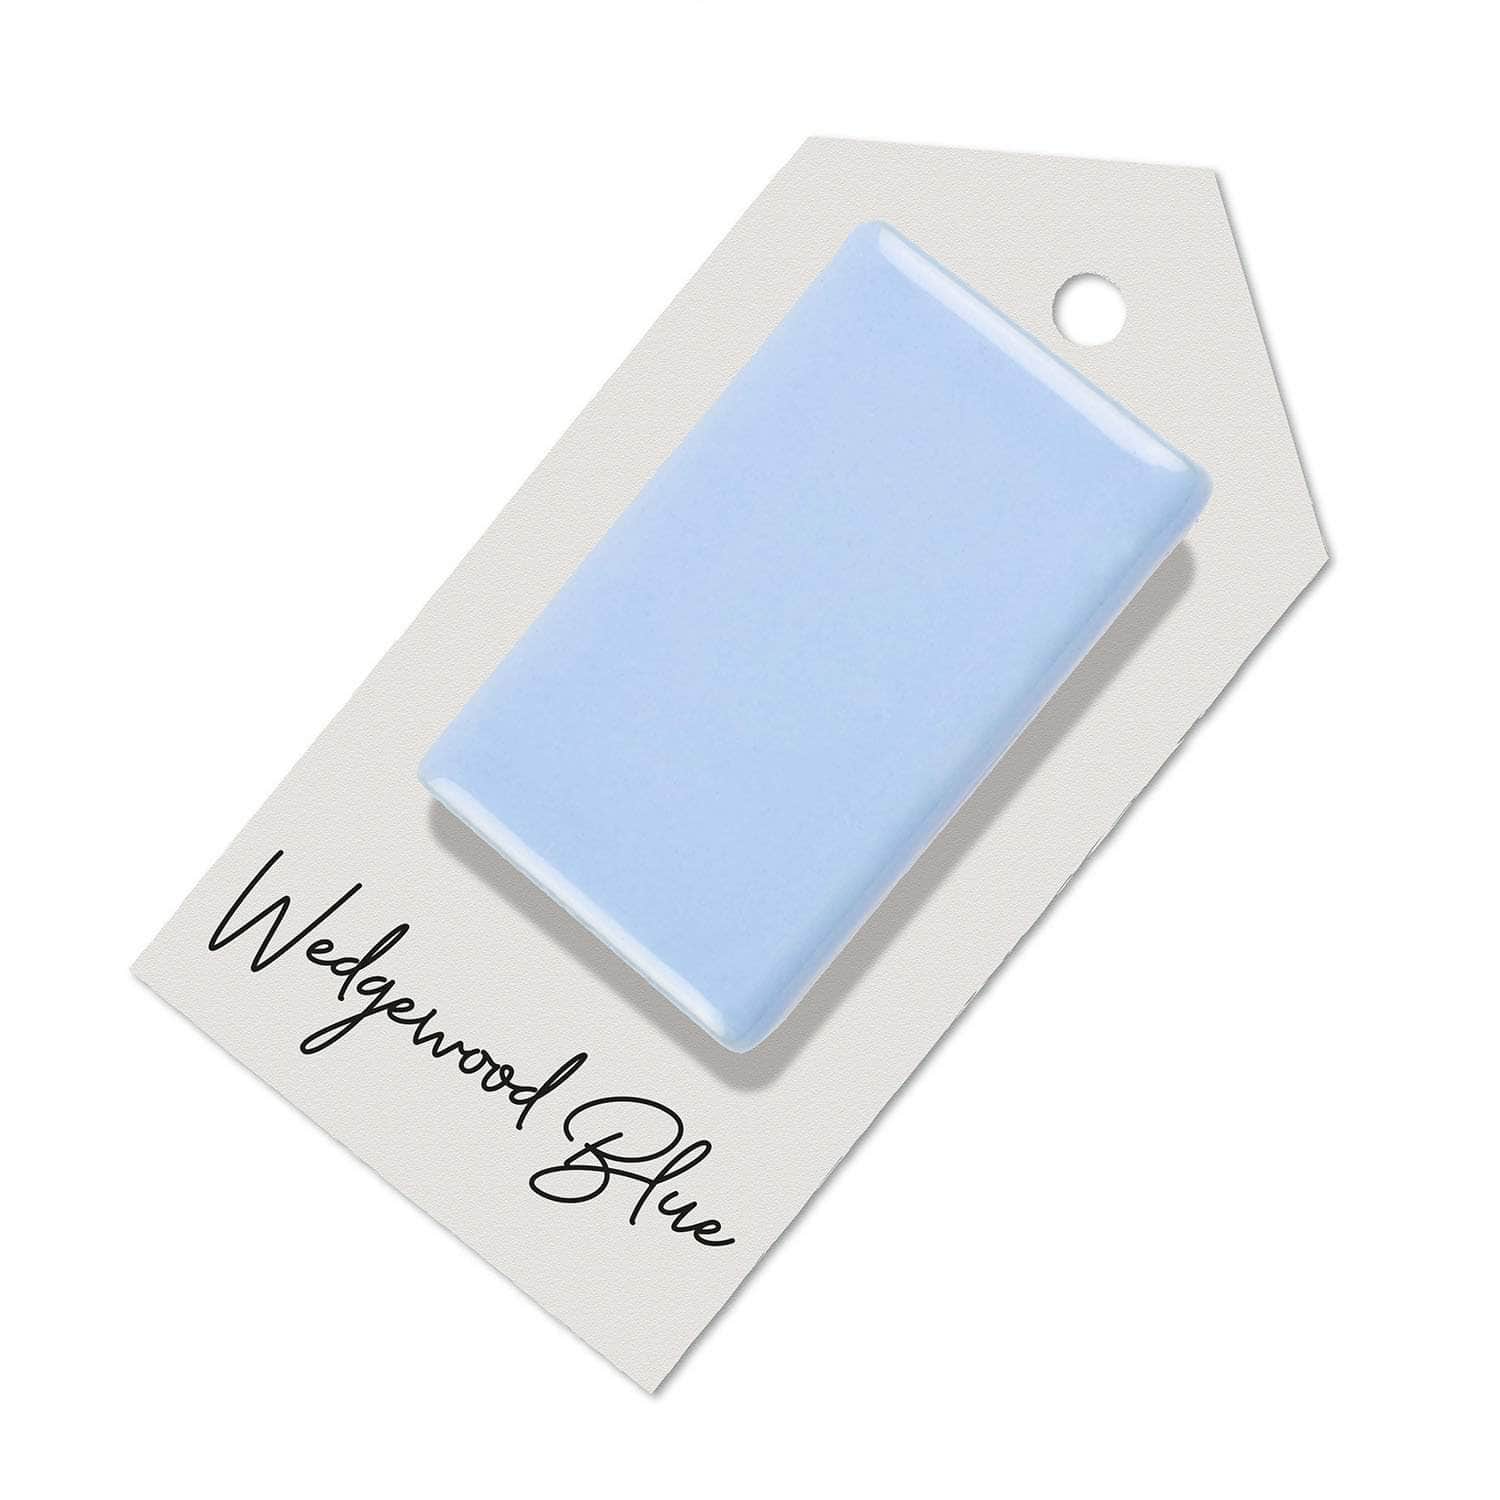 Wedgewood Blue sample for Aga range cooker re-enamelling & reconditioned cookers